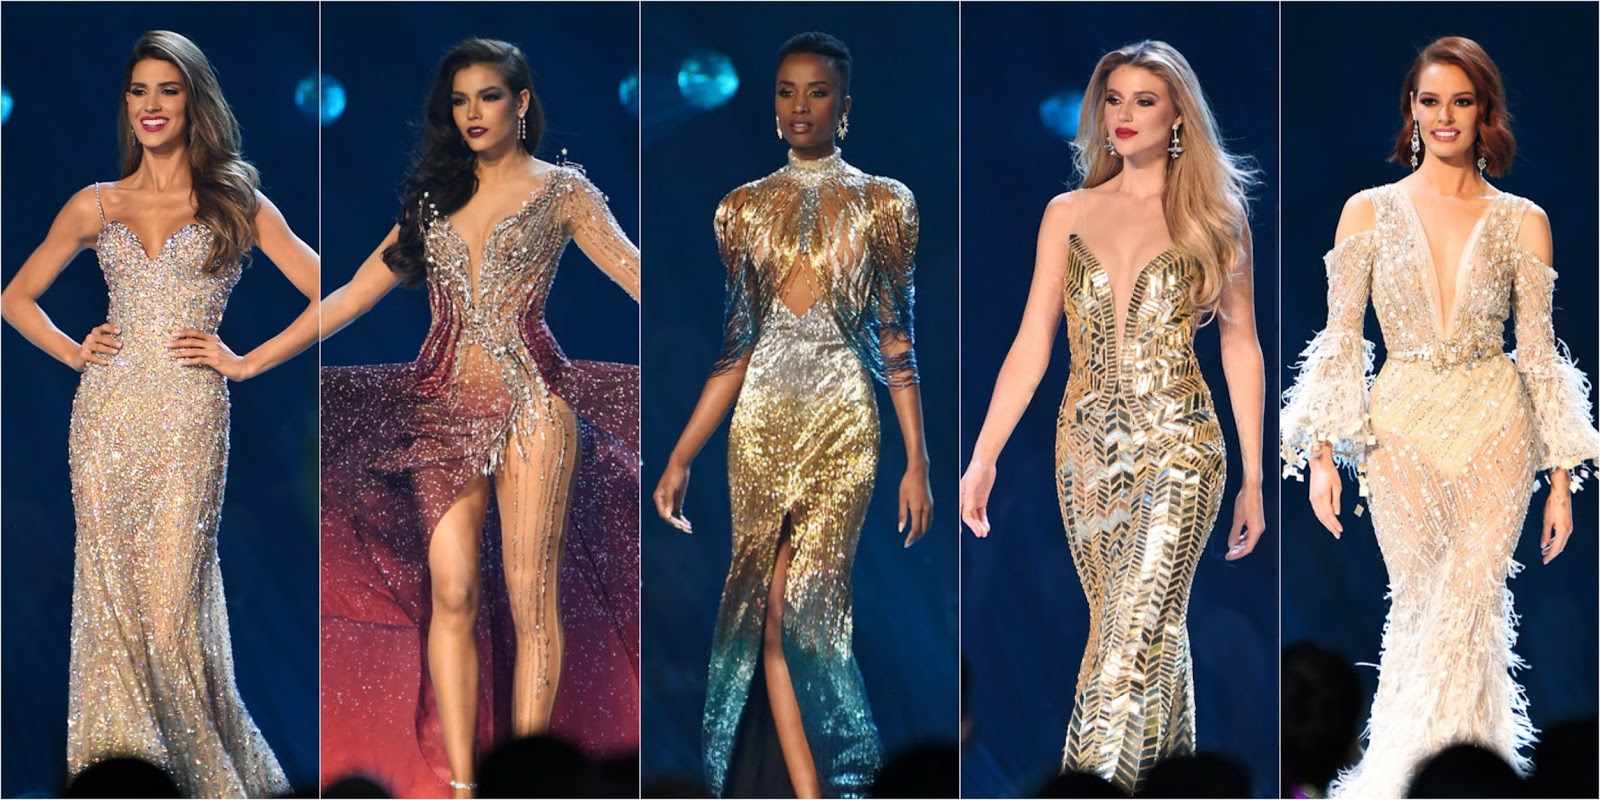 Recap: Evening Gowns of Top 10 Finalists and Miss Universe Winner